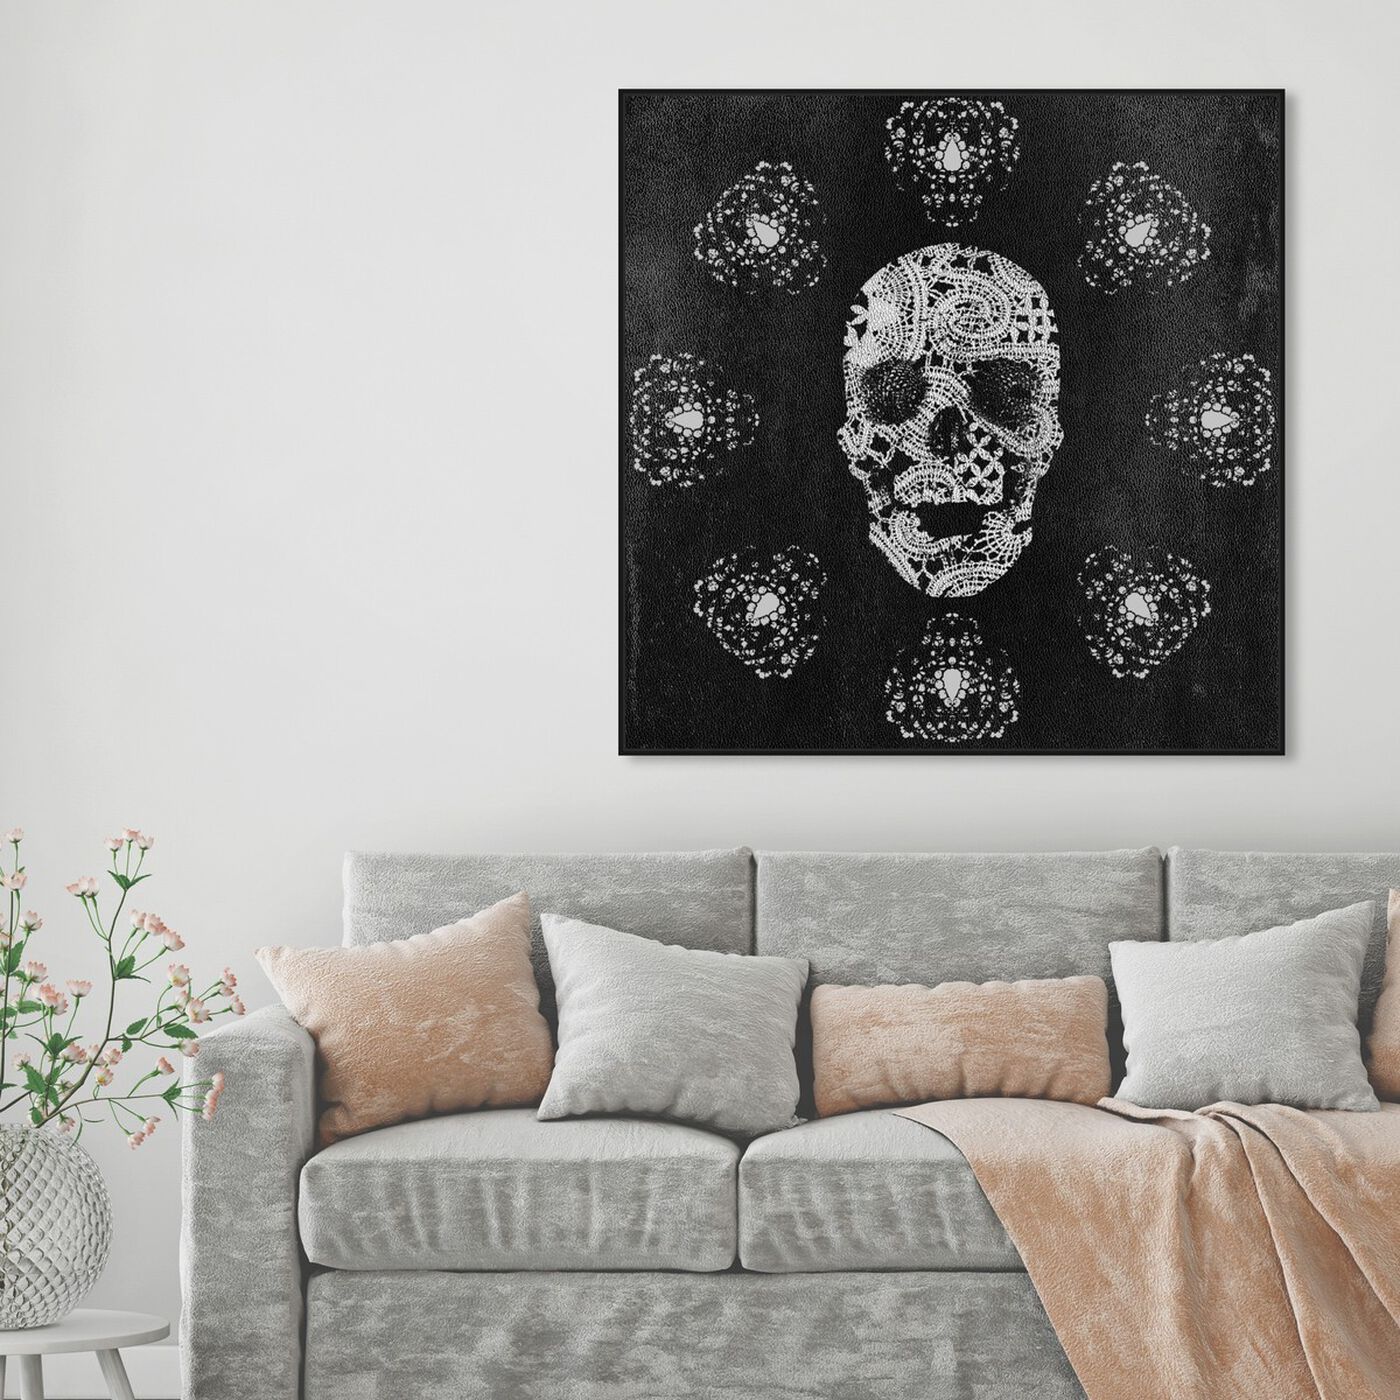 Hanging view of Lace and Leather featuring symbols and objects and skull art.